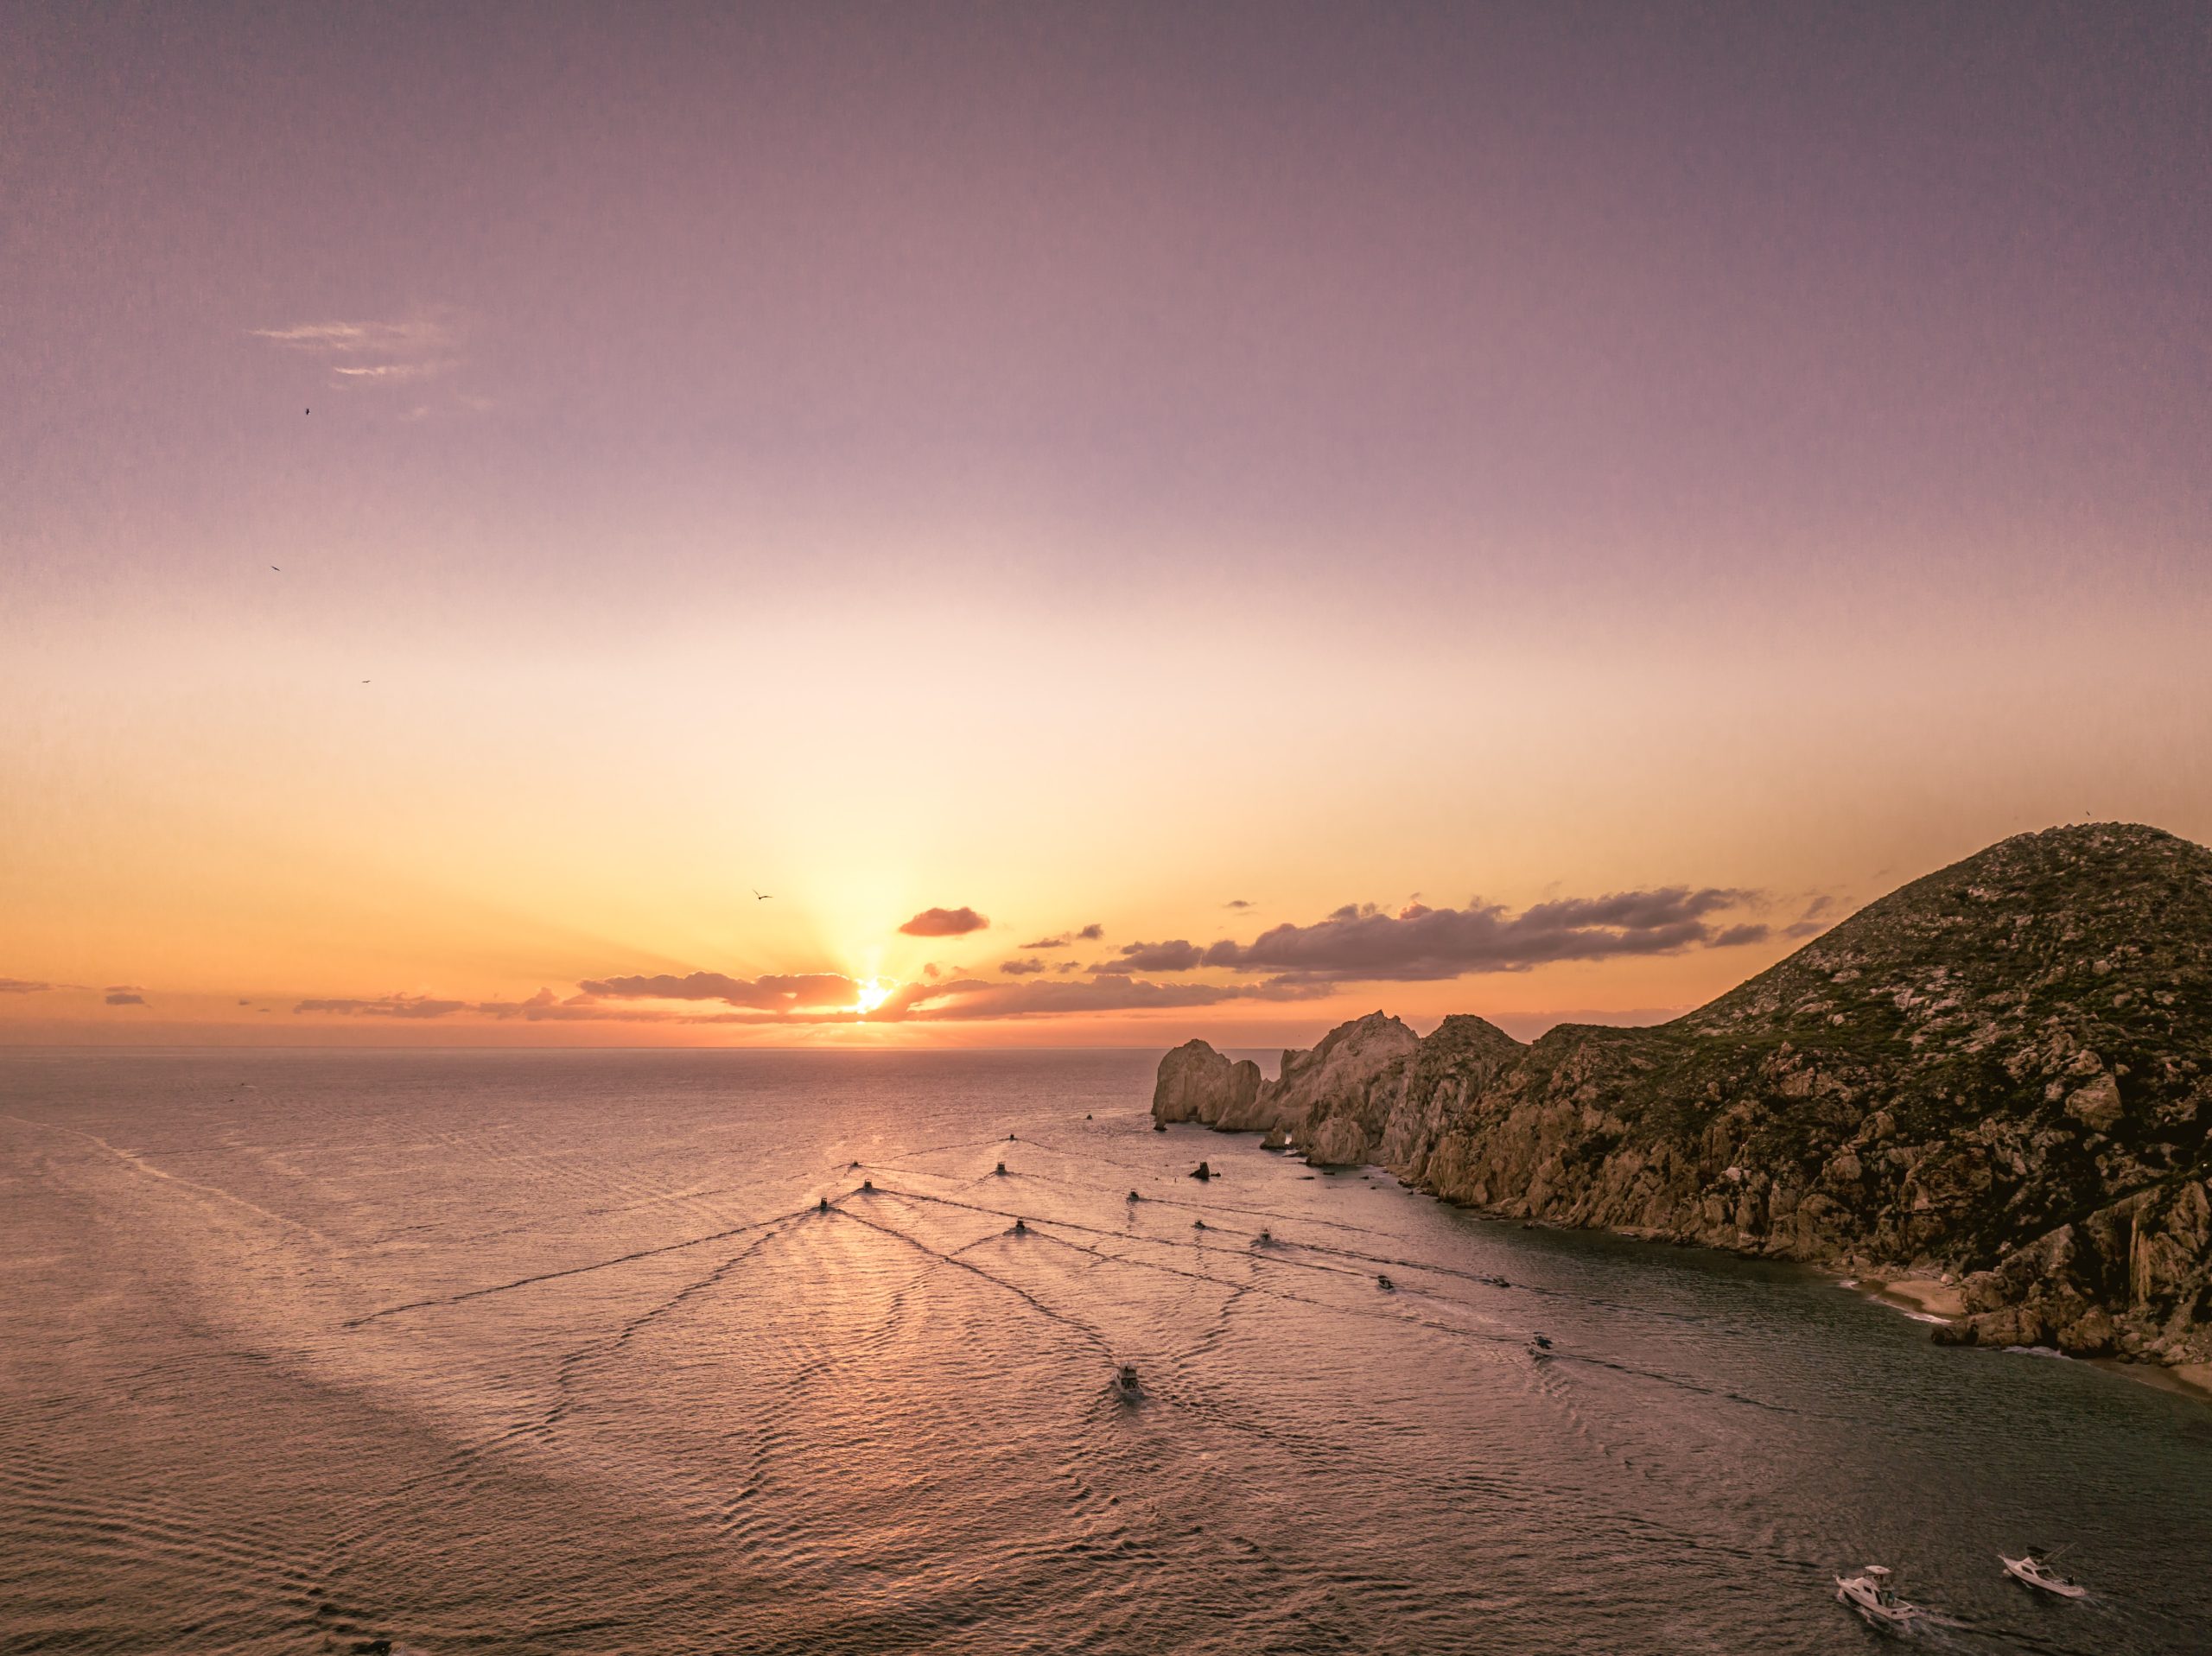 sunset over the ocean in cabo